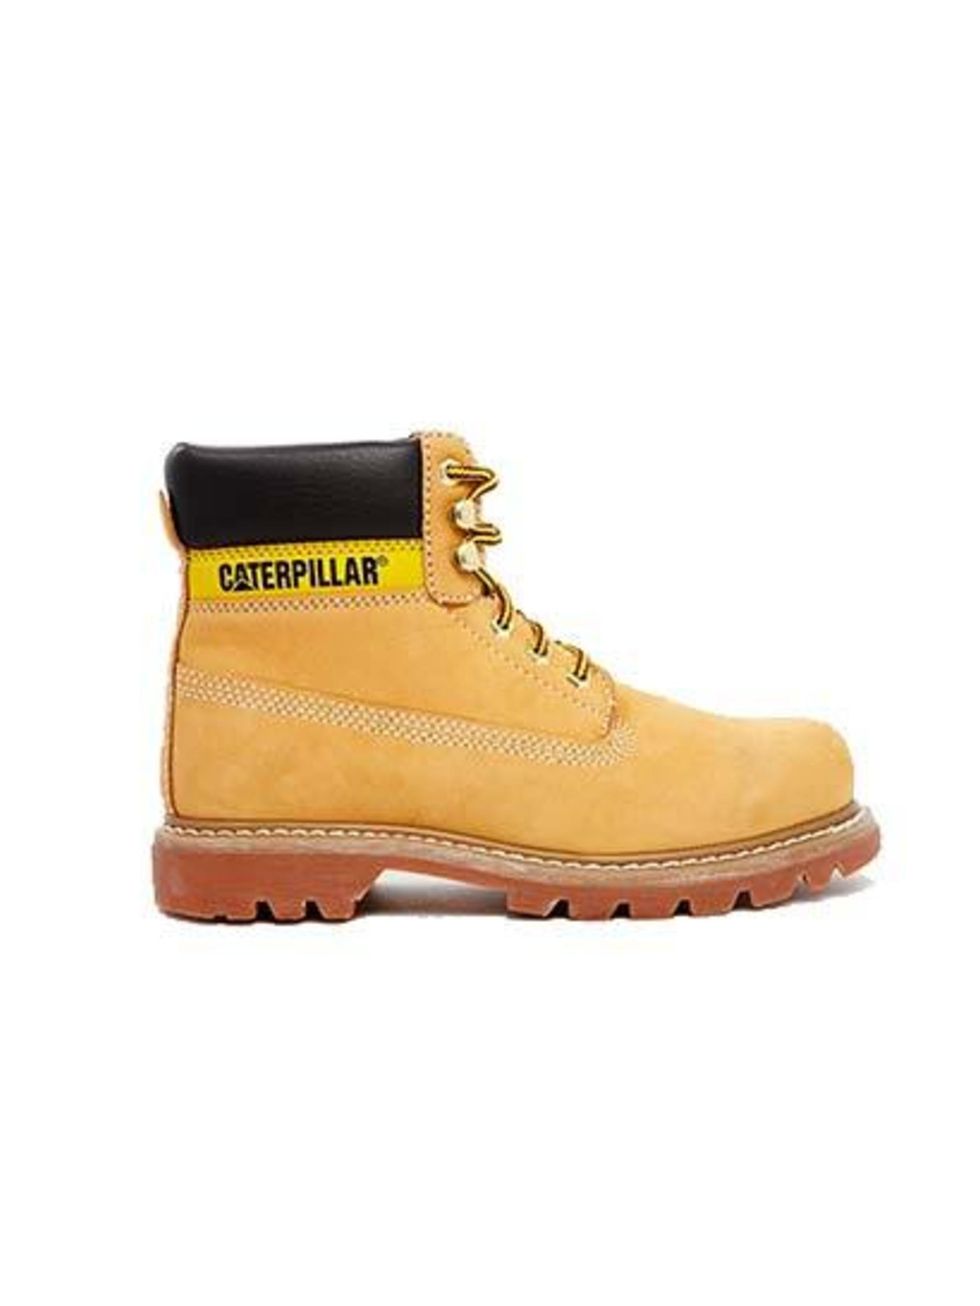 Caterpillar ankle boots, £110 available at ASOS.